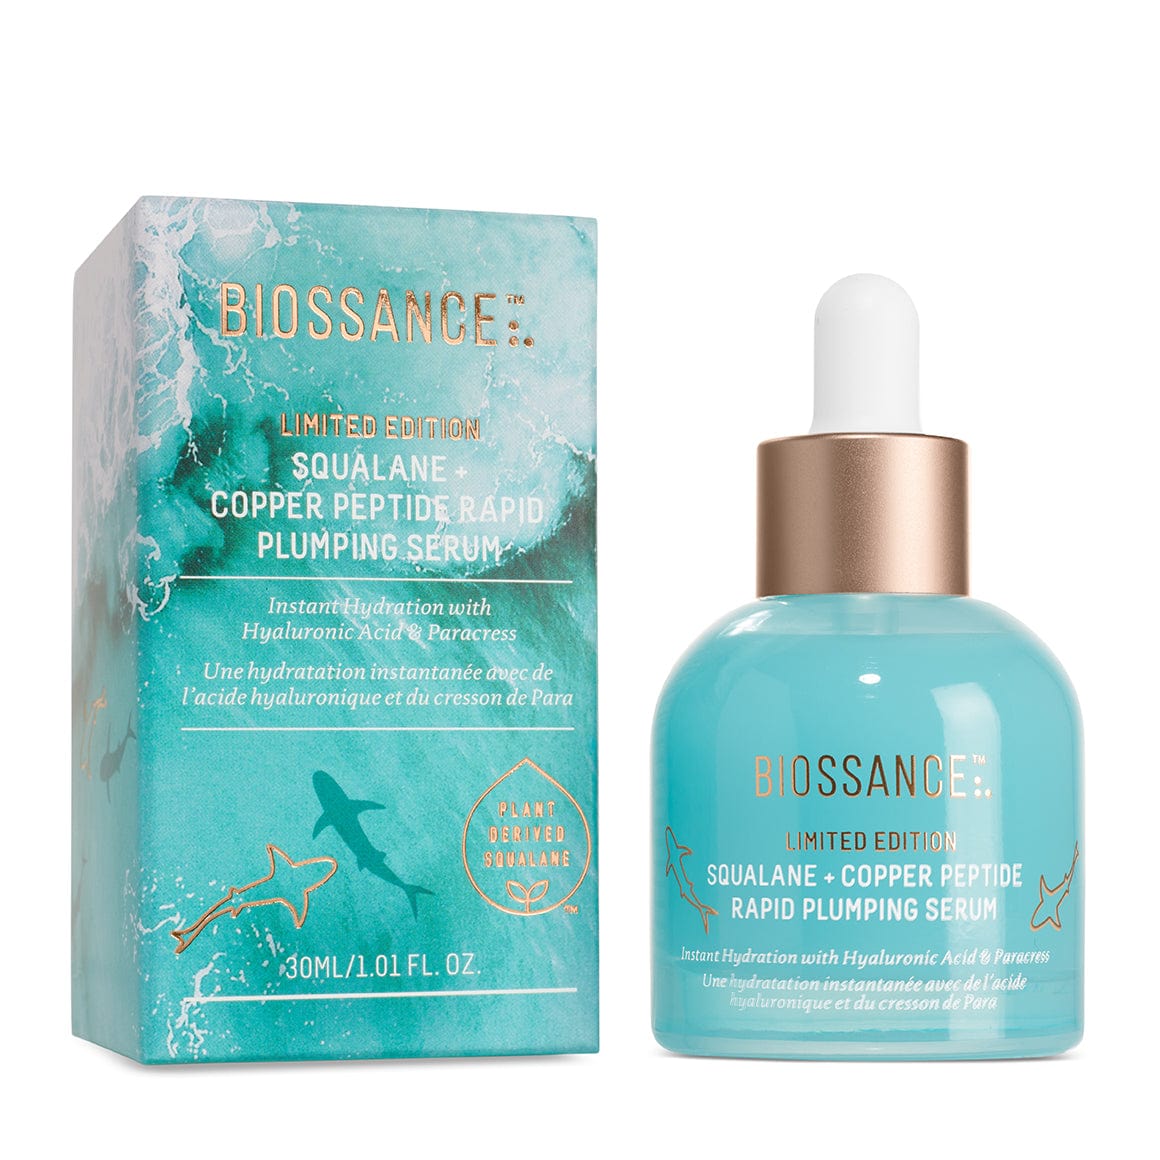 Biossance Squalane & Copper Peptide Rapid Plumping Serum Skin Care Limited Edition Gift Size (30 ml/1.01 oz) Cruelty Free, Nontoxic, Paraben Free